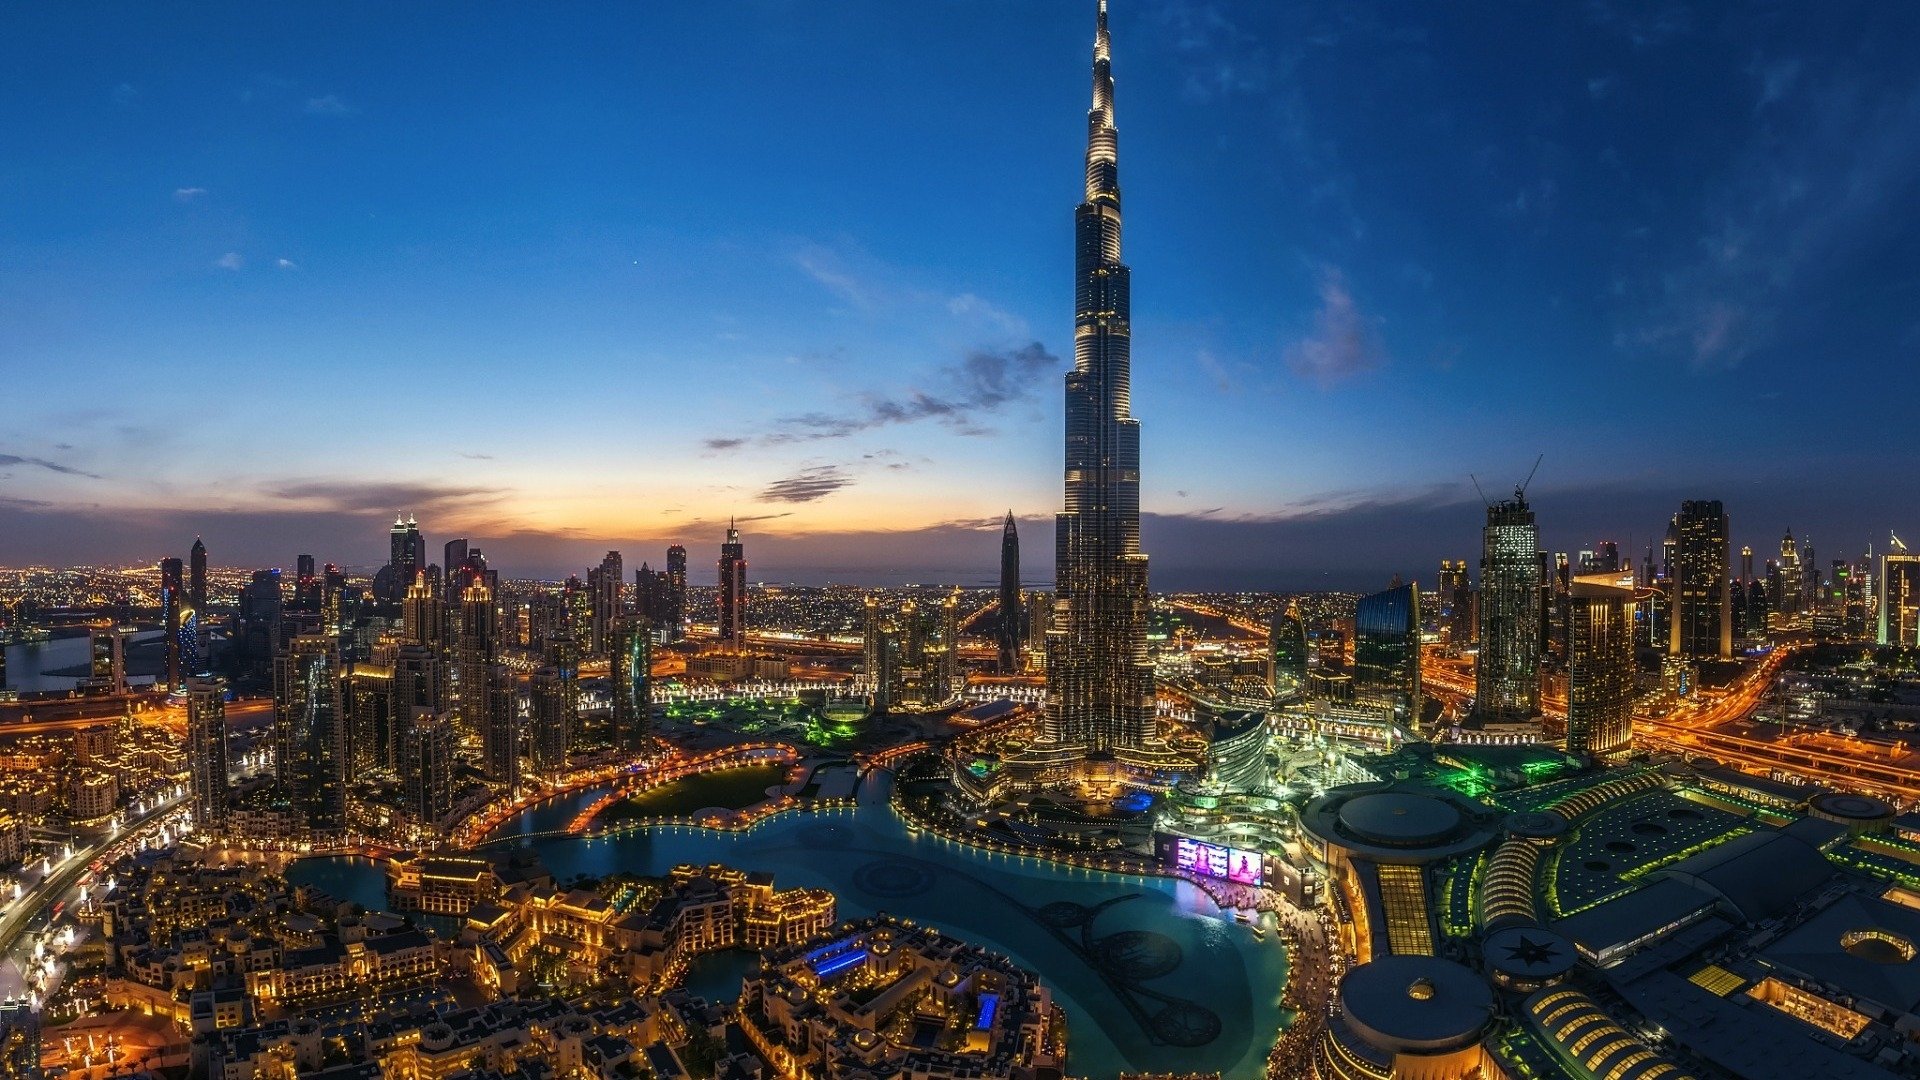 dubai wallpapers and desktop backgrounds from HD [1920x1080] up to 8K ...